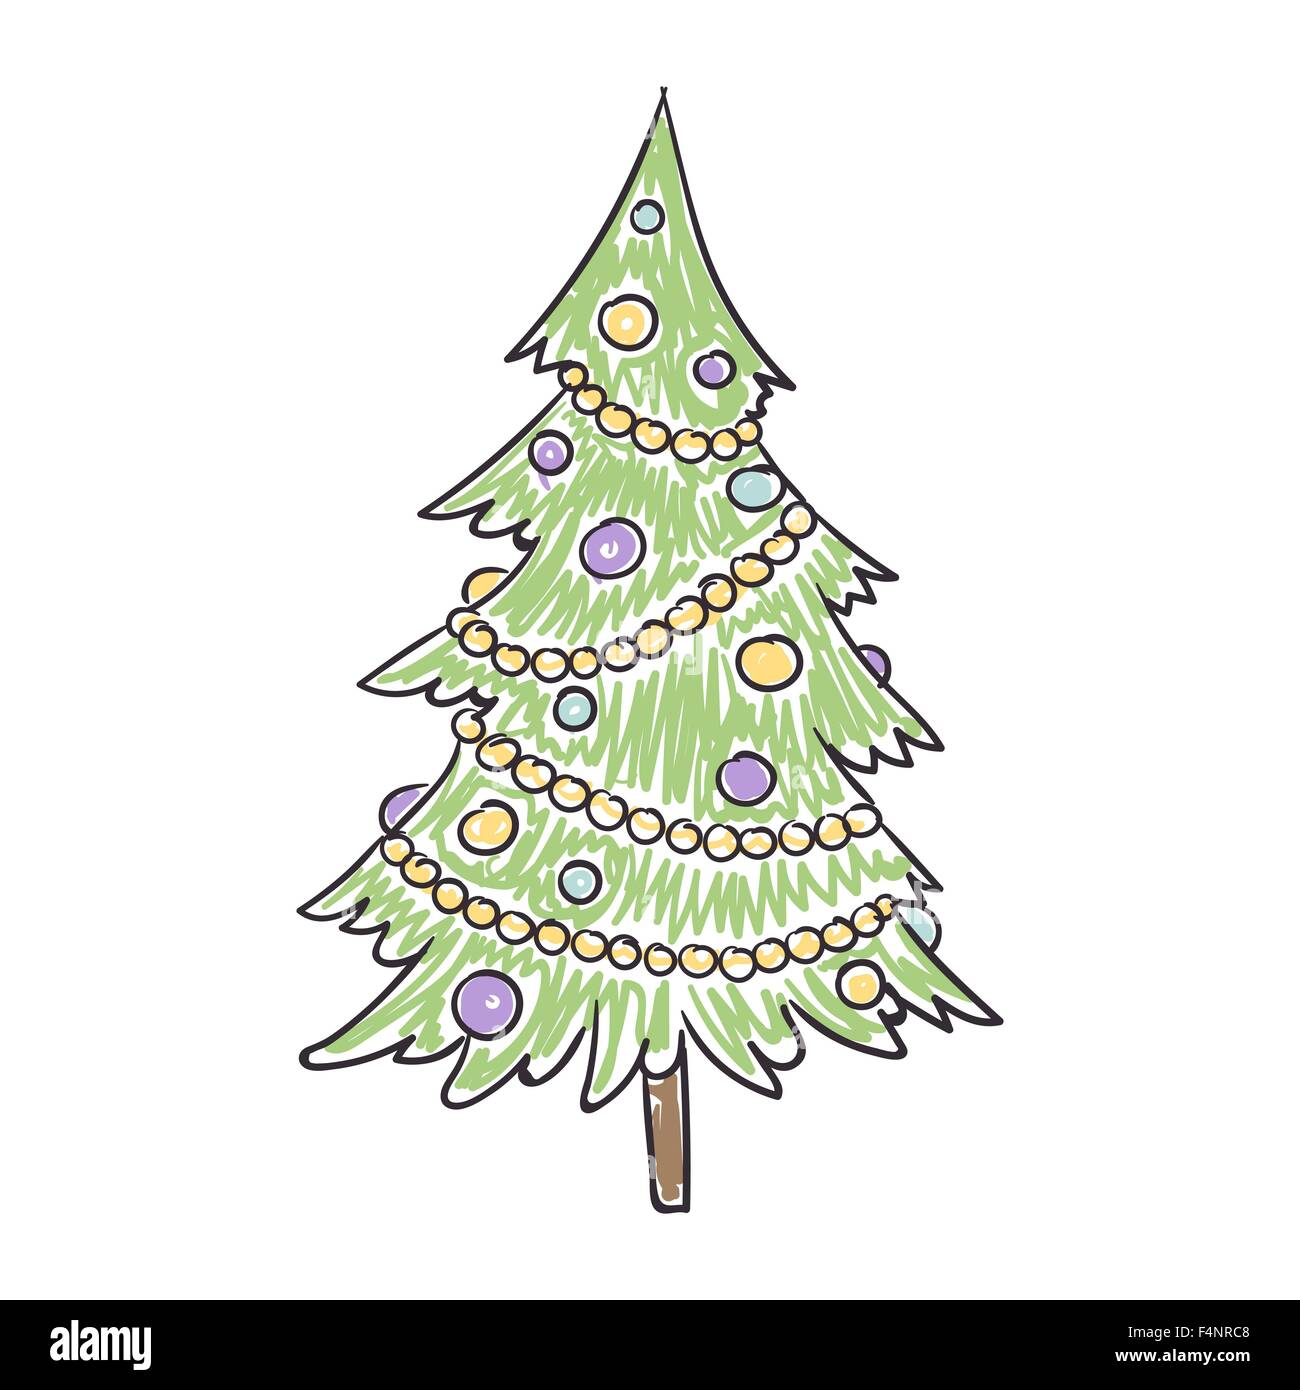 Children's Drawing of a Christmas Tree Stock Photo - Alamy